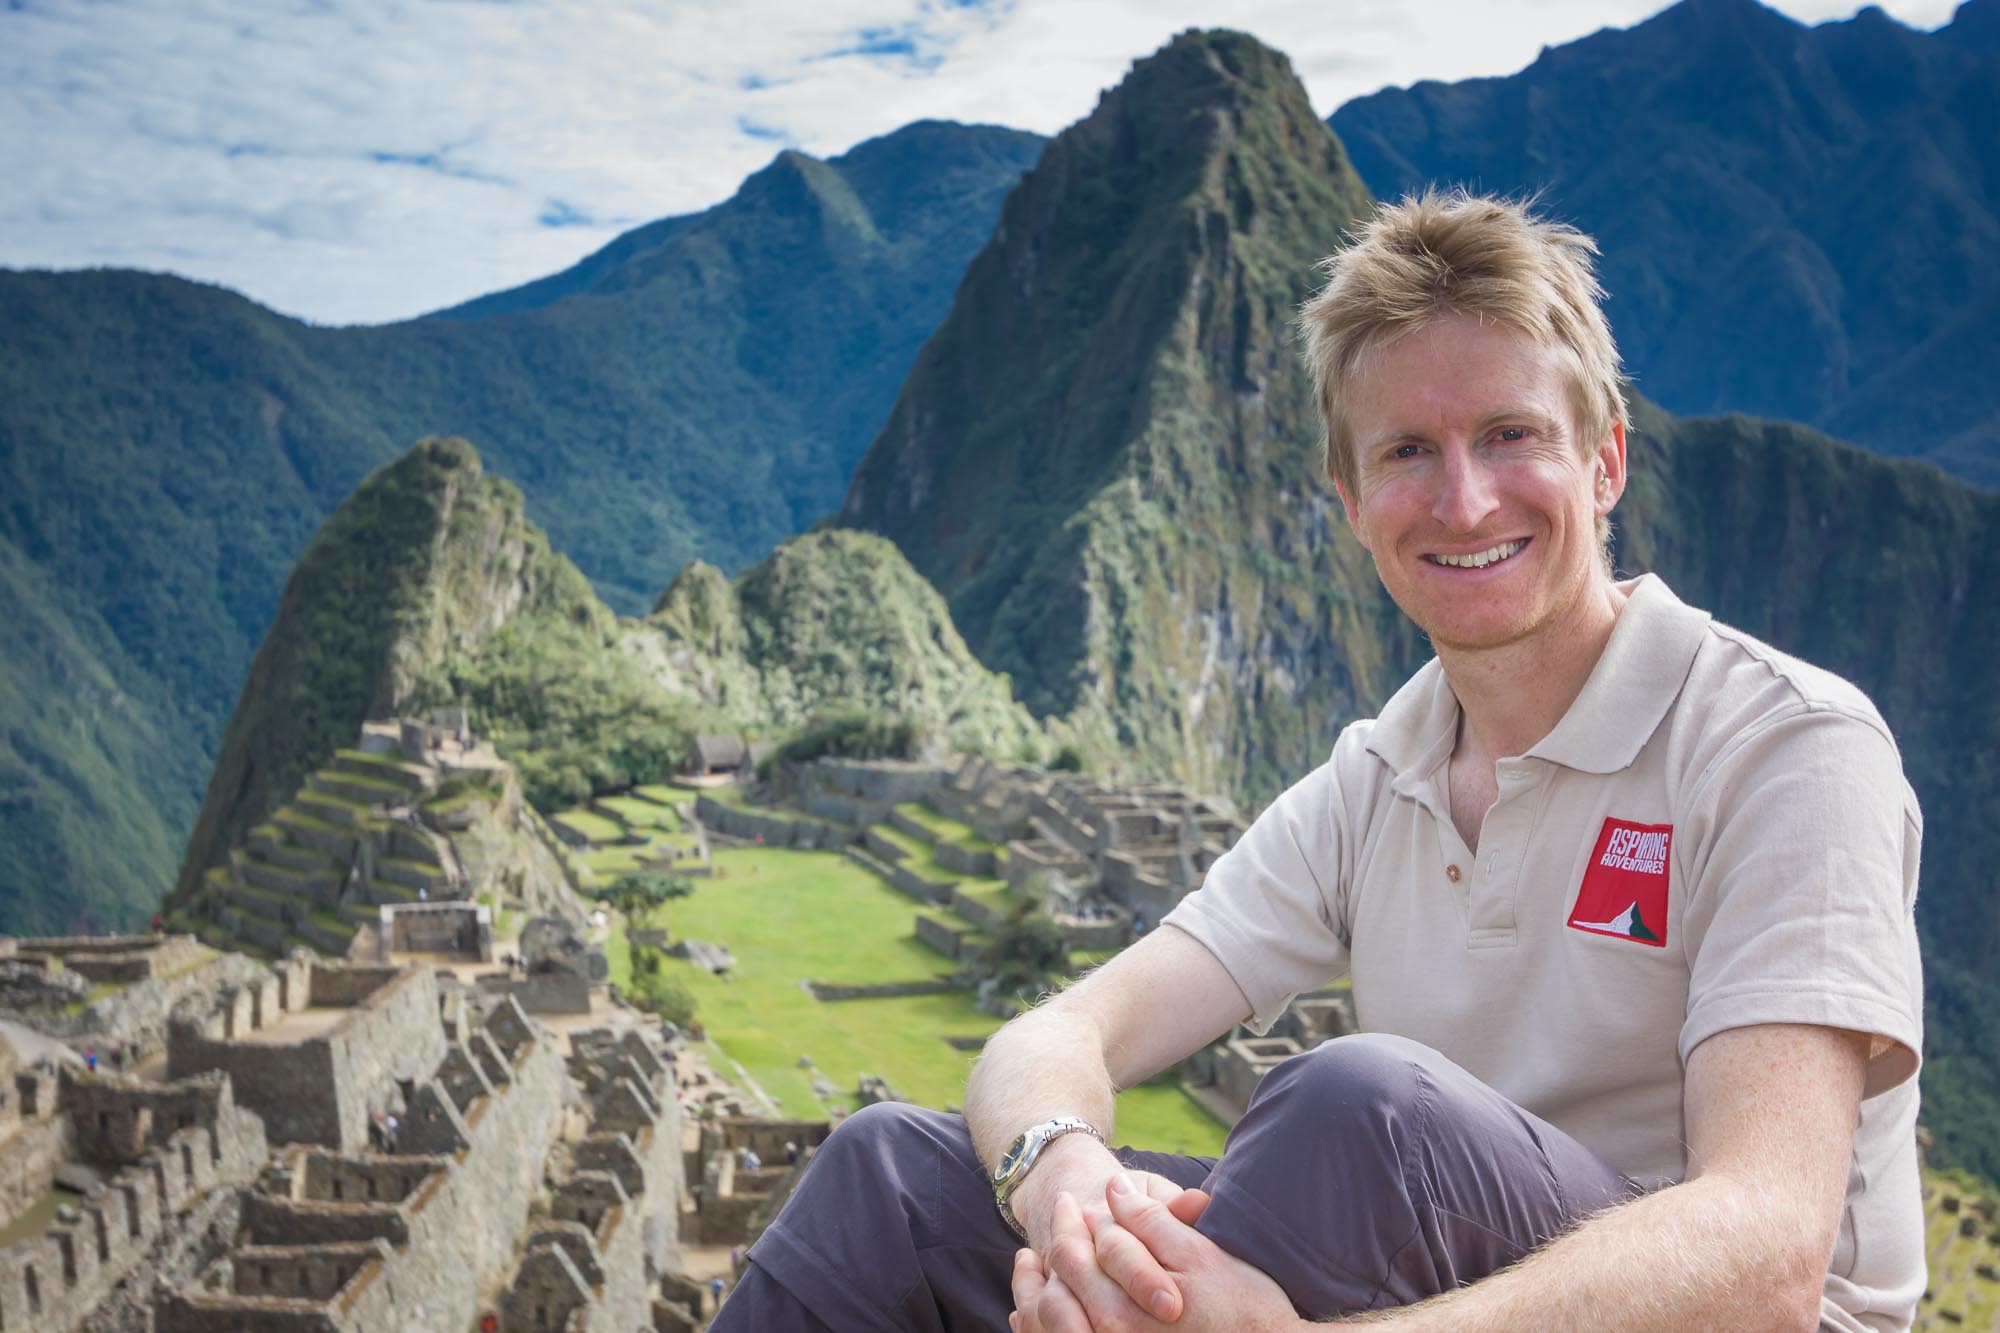 Aspiring's co-founder Steve Wilson is here to help you plan your private Peru tour